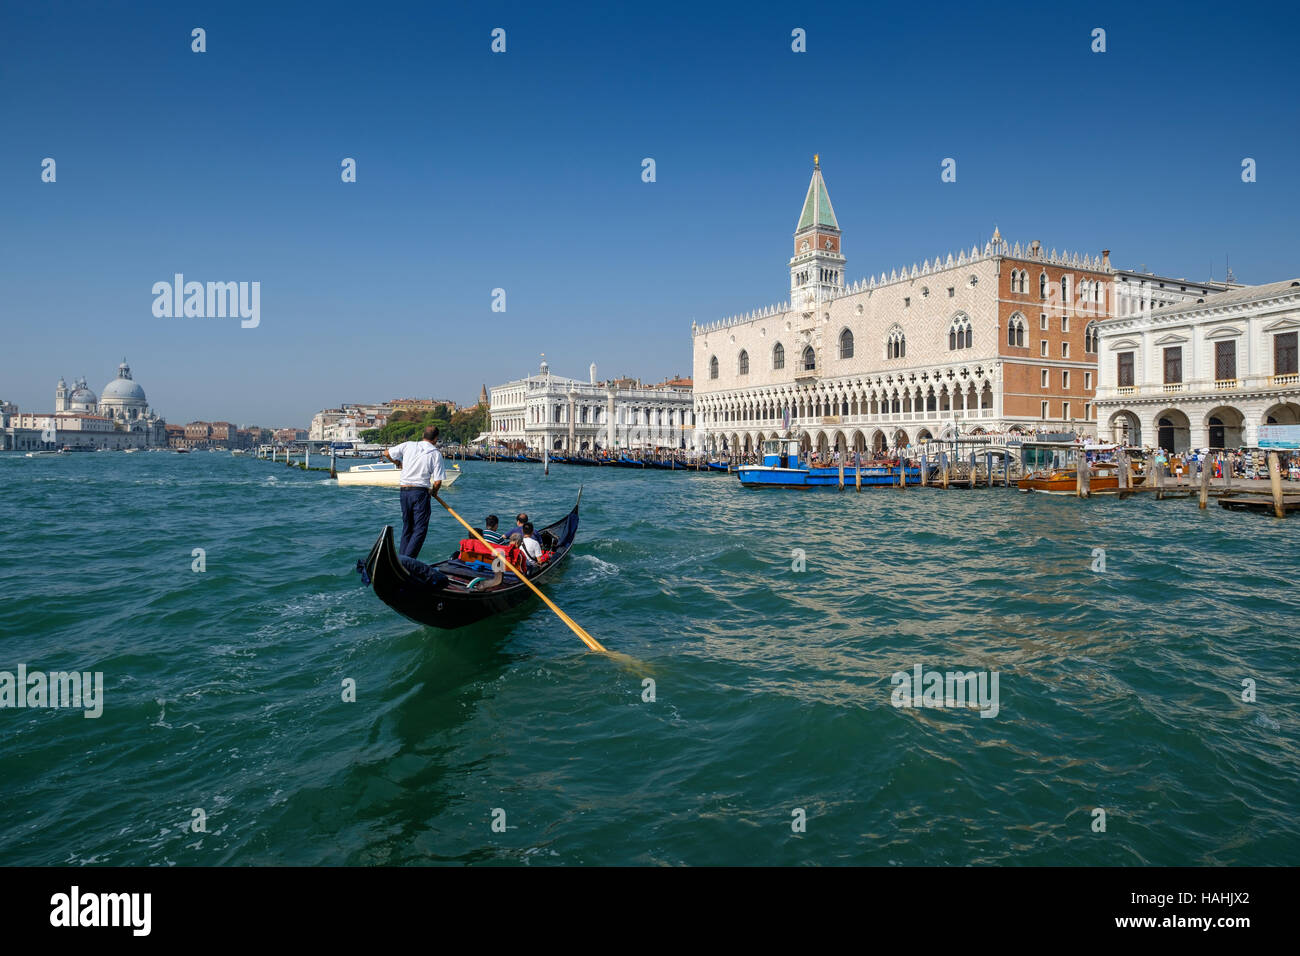 Doge's Palace and entrance to Piazza San Marco, St Mark's Square, from Grand Canal with gondola in foreground. Venice Italy Stock Photo